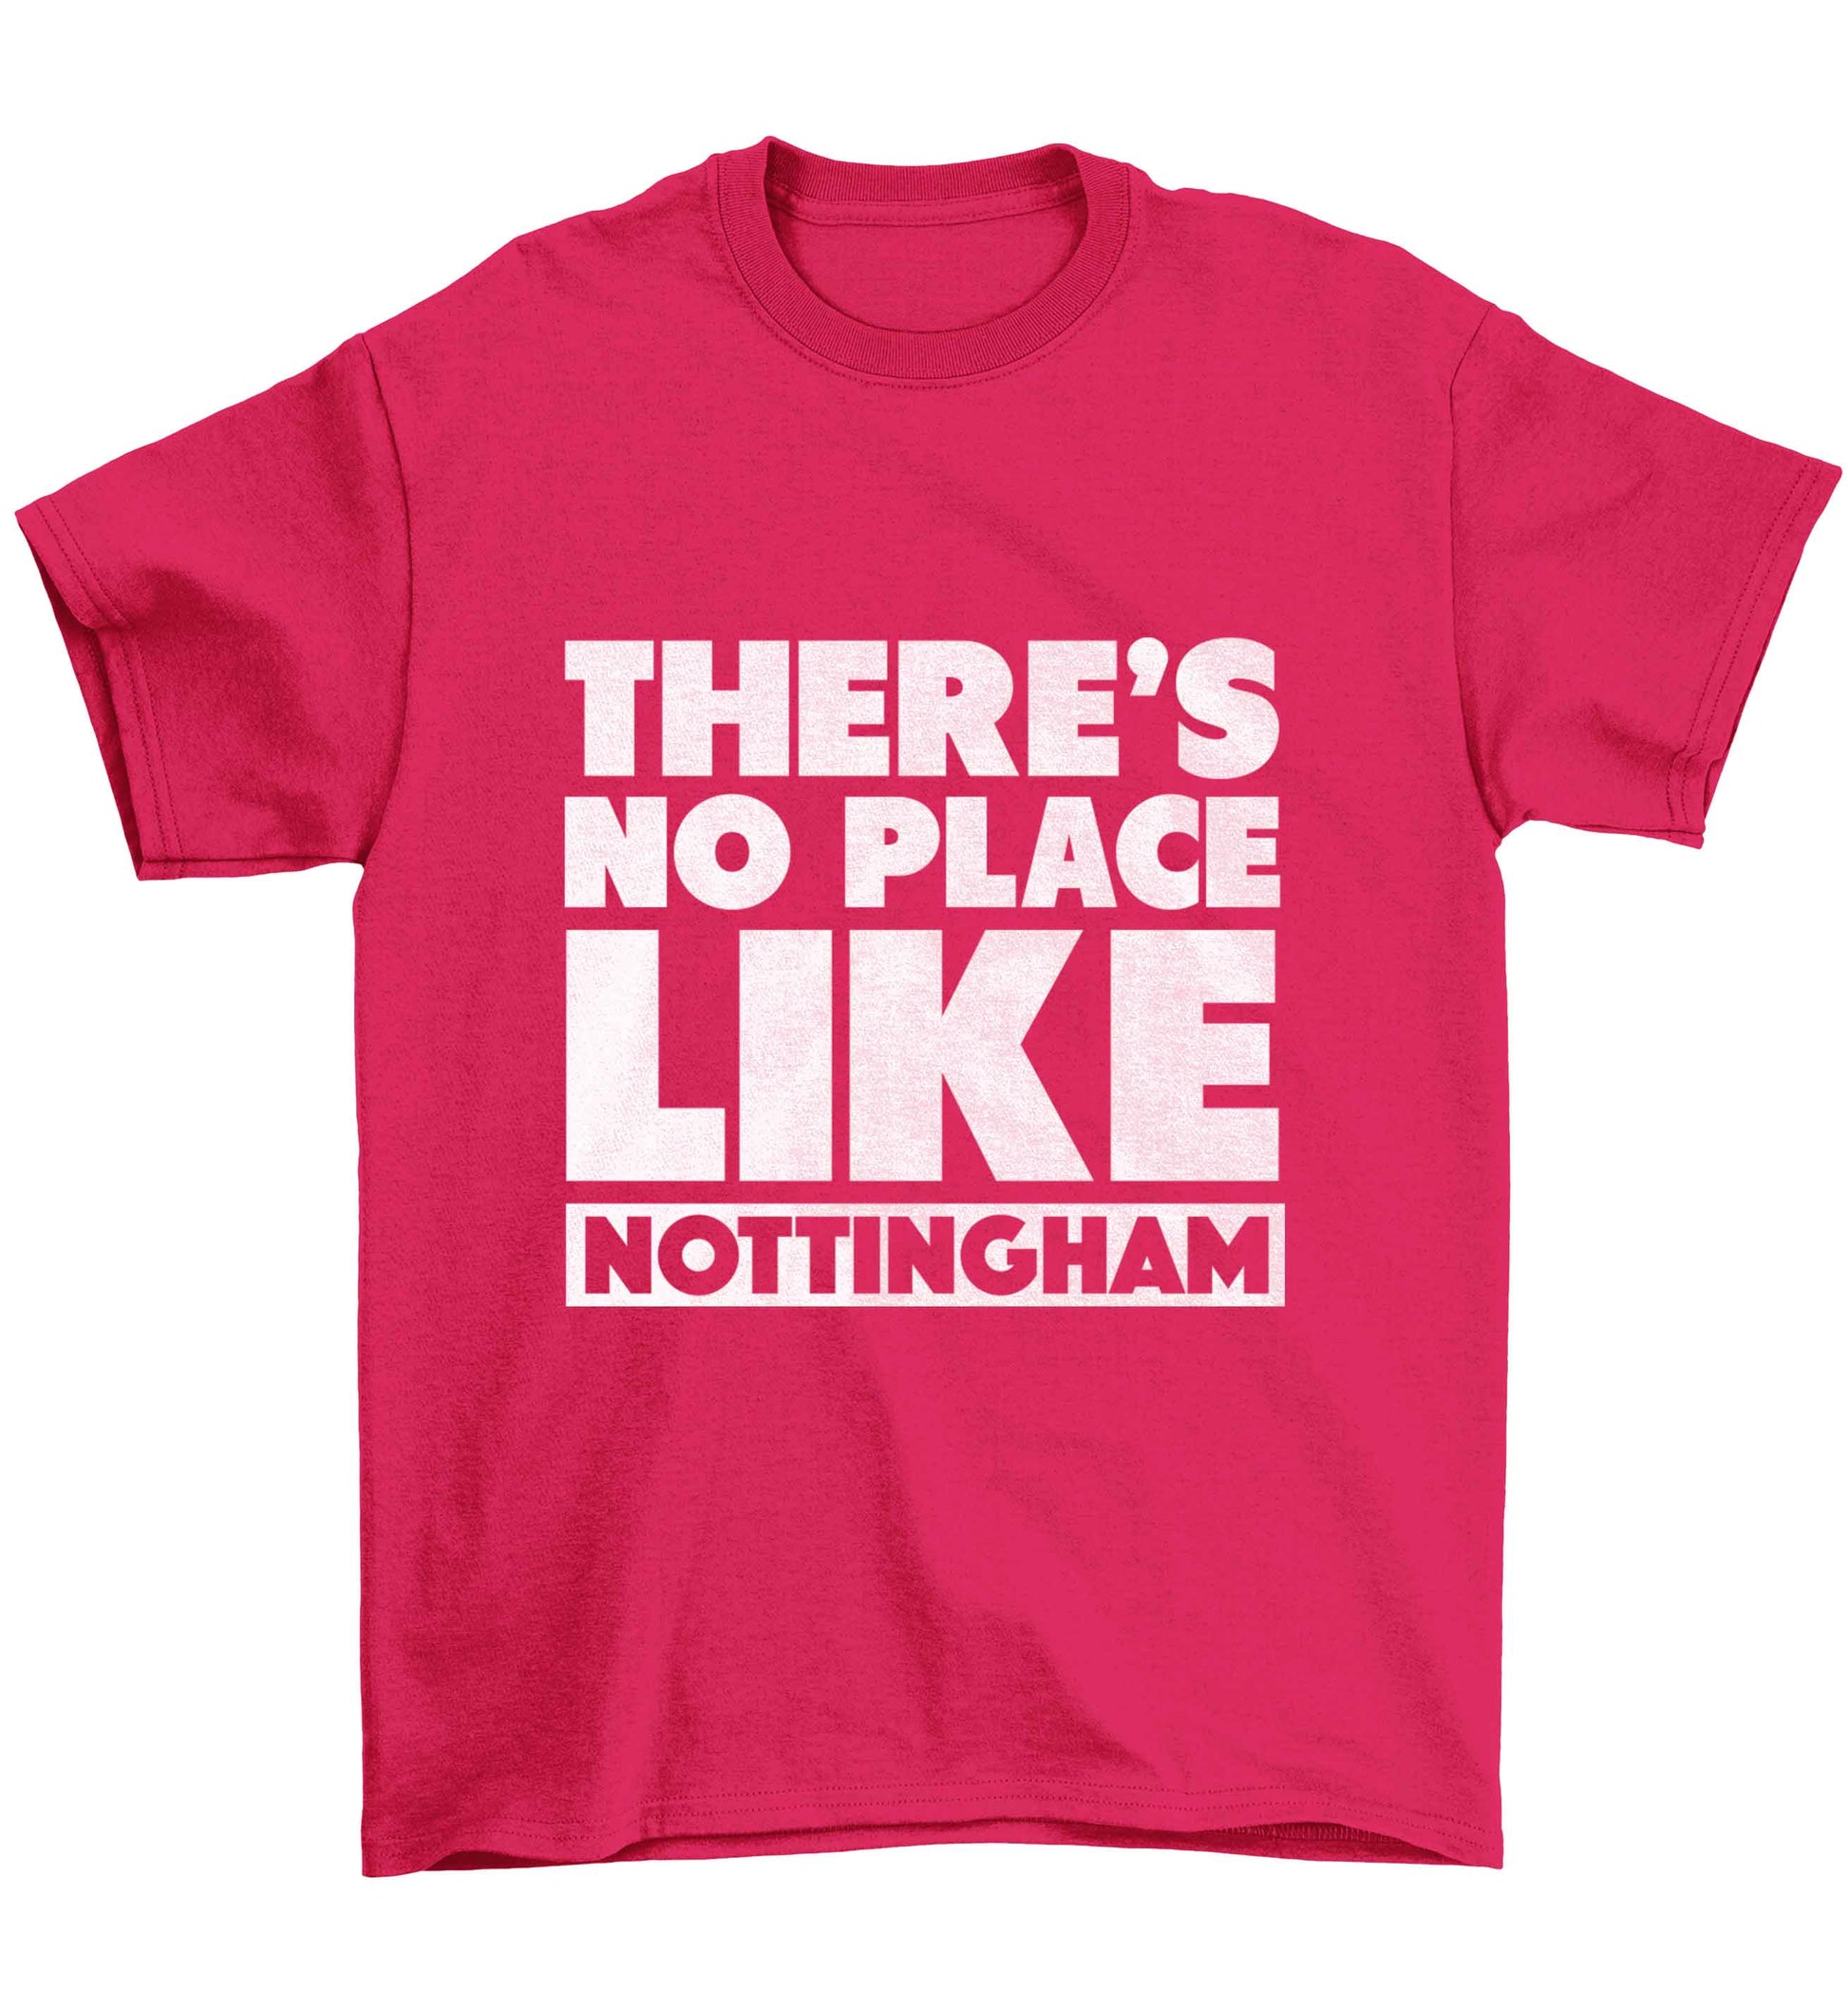 There's no place like Nottingham Children's pink Tshirt 12-13 Years